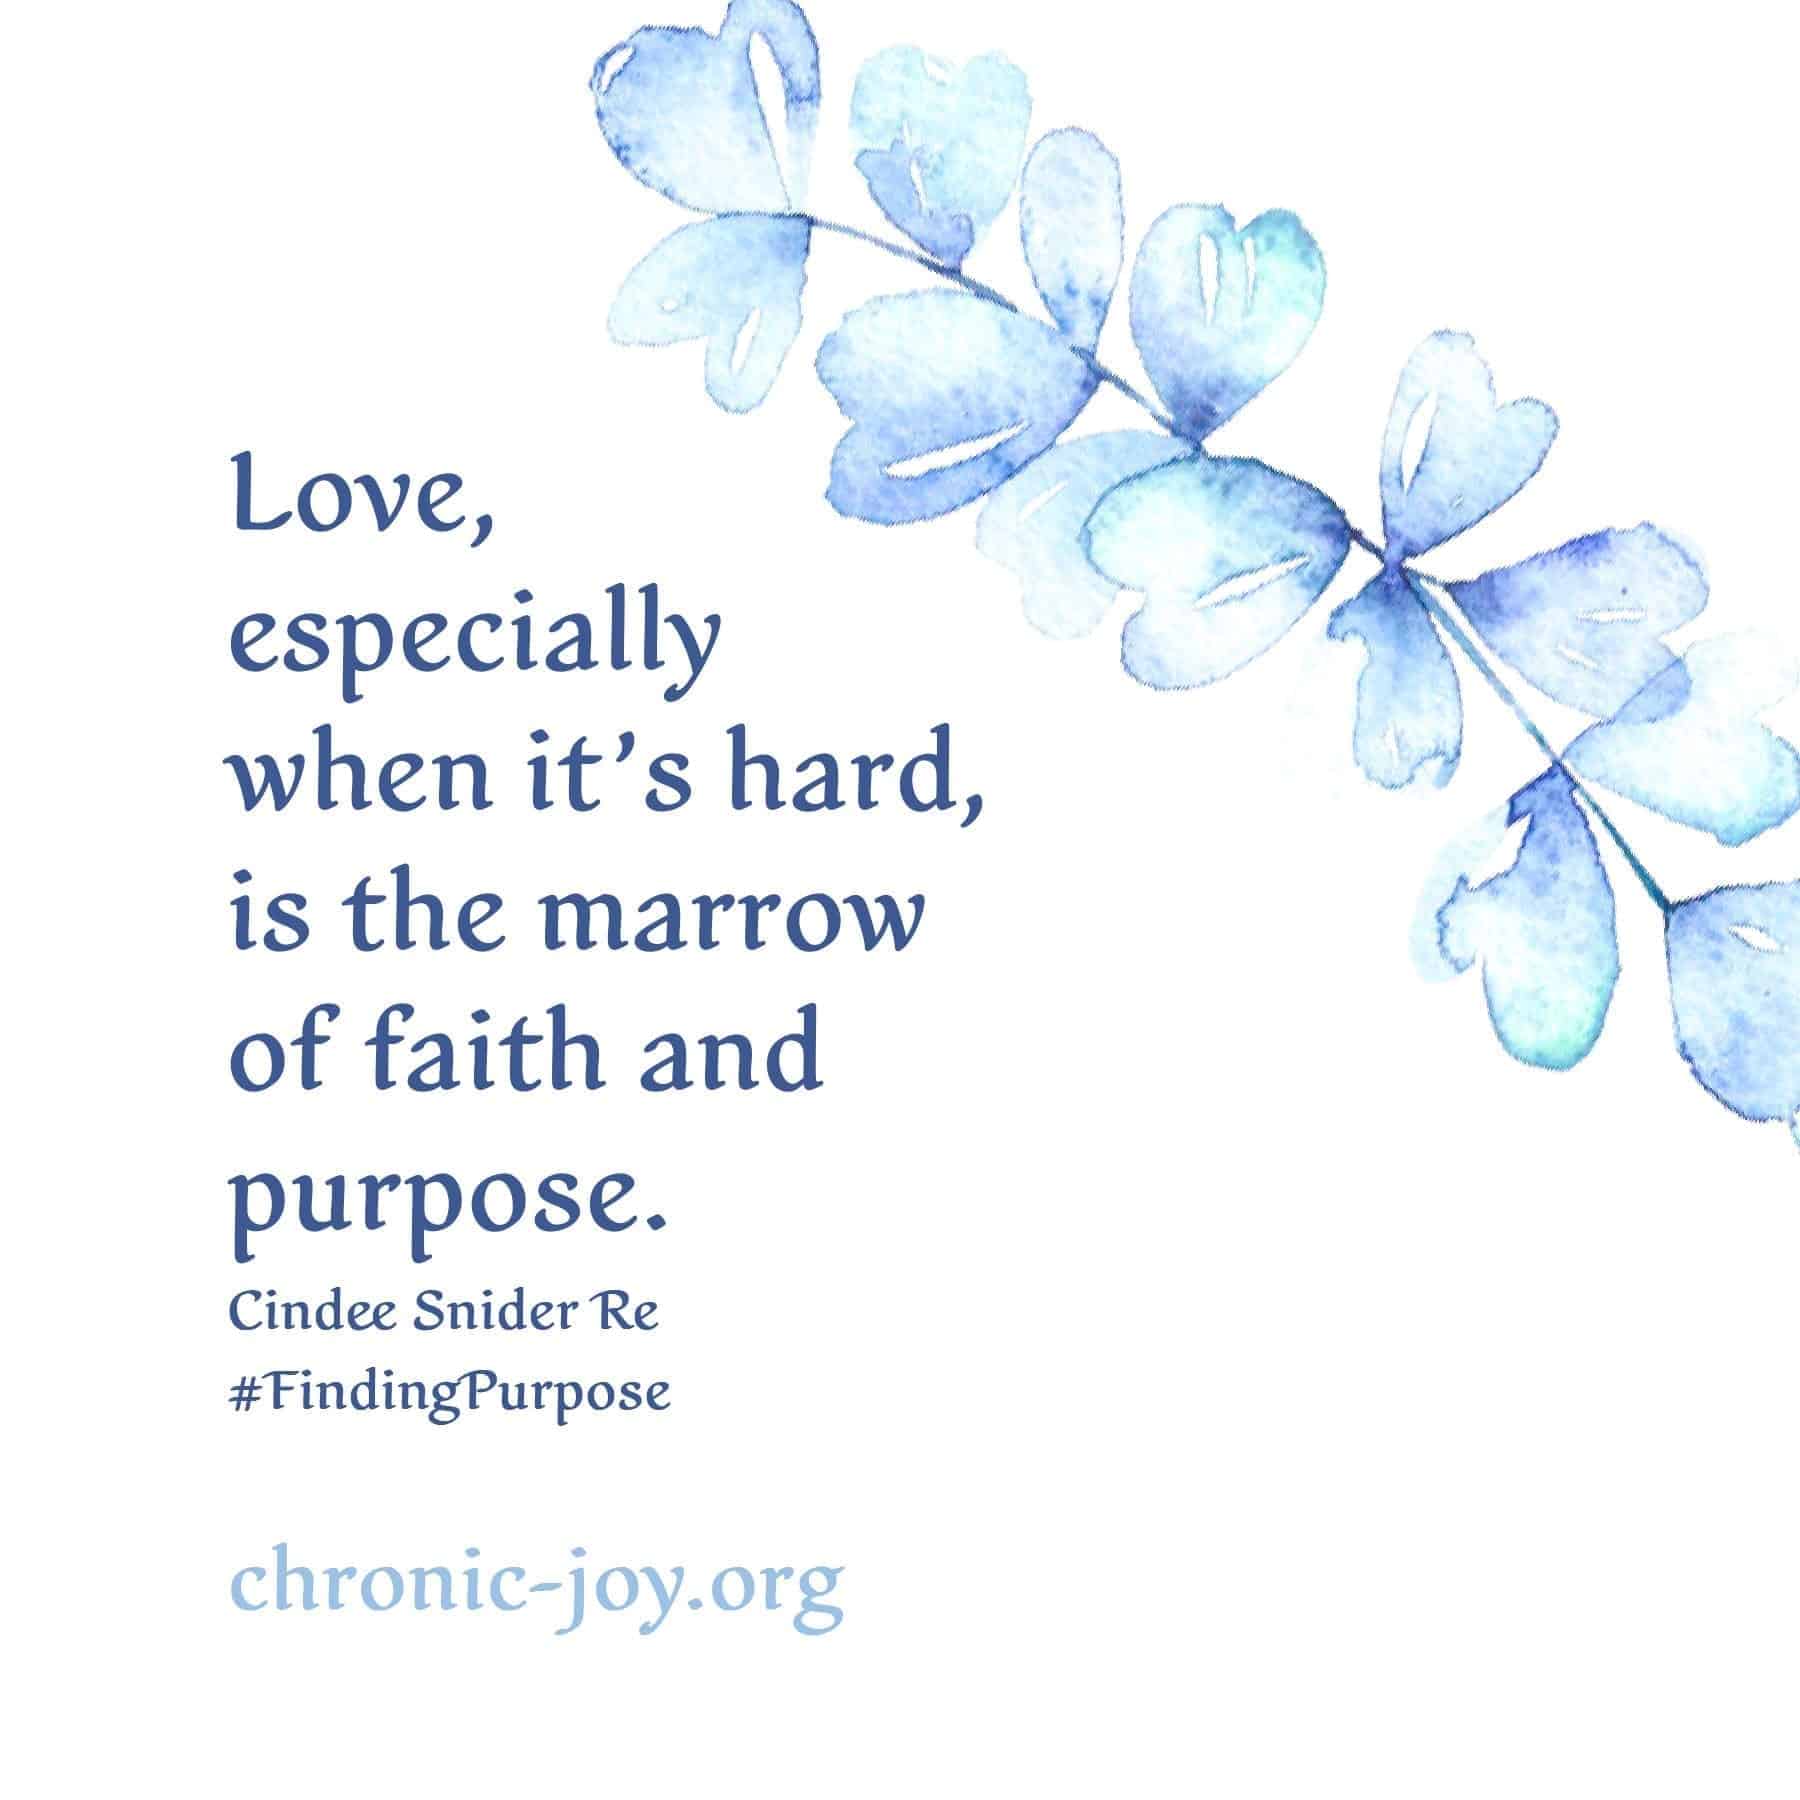 Love, especially when it's hard, is the marrow of faith and purpose.